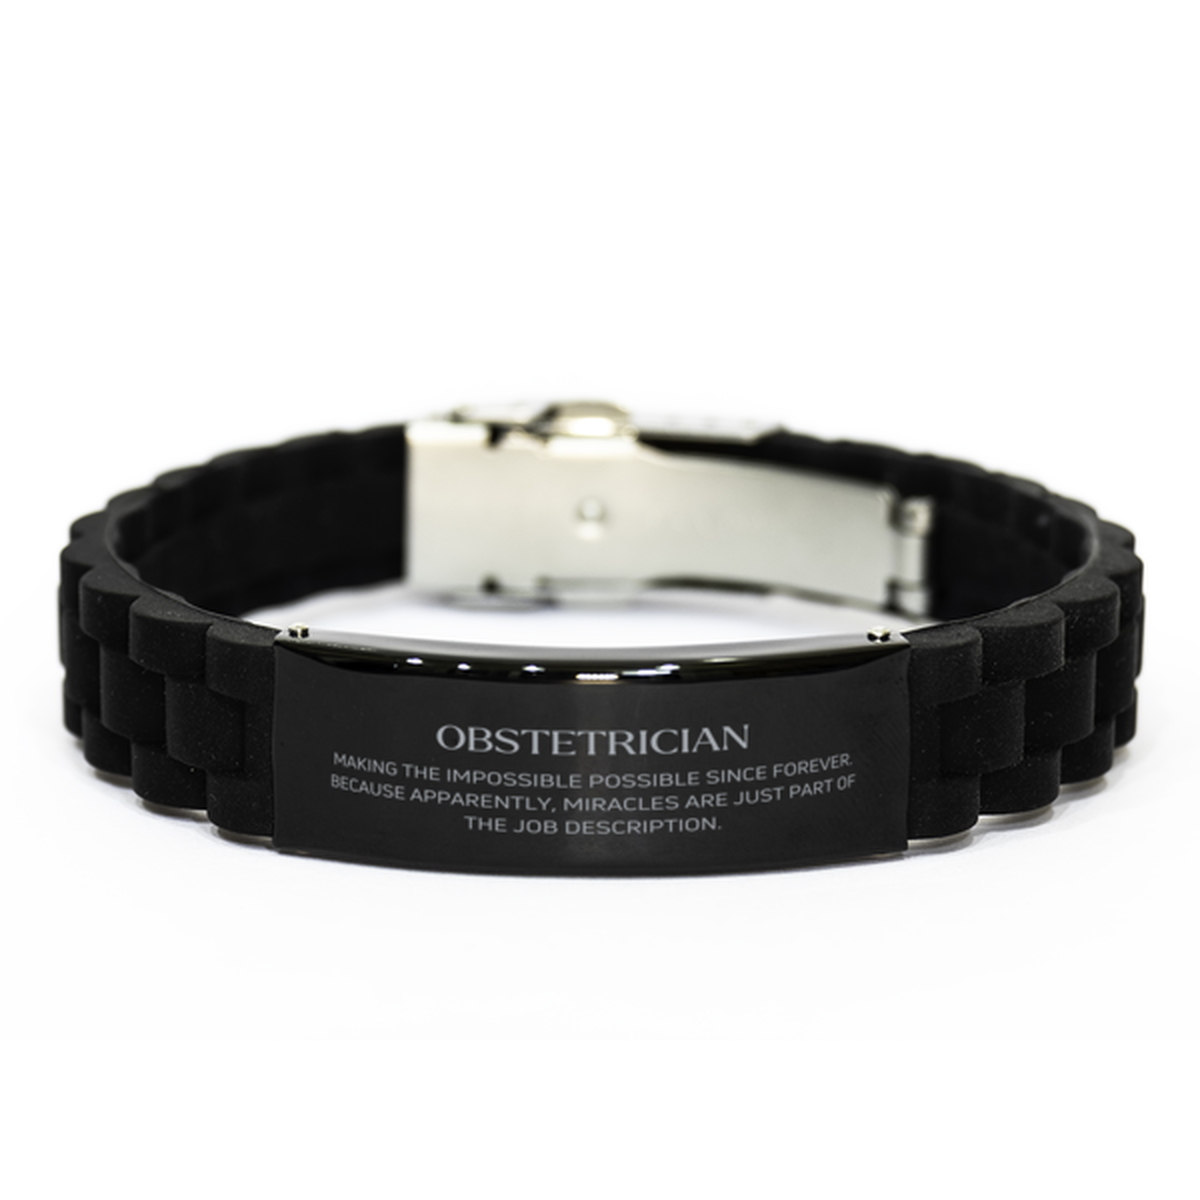 Funny Obstetrician Gifts, Miracles are just part of the job description, Inspirational Birthday Black Glidelock Clasp Bracelet For Obstetrician, Men, Women, Coworkers, Friends, Boss